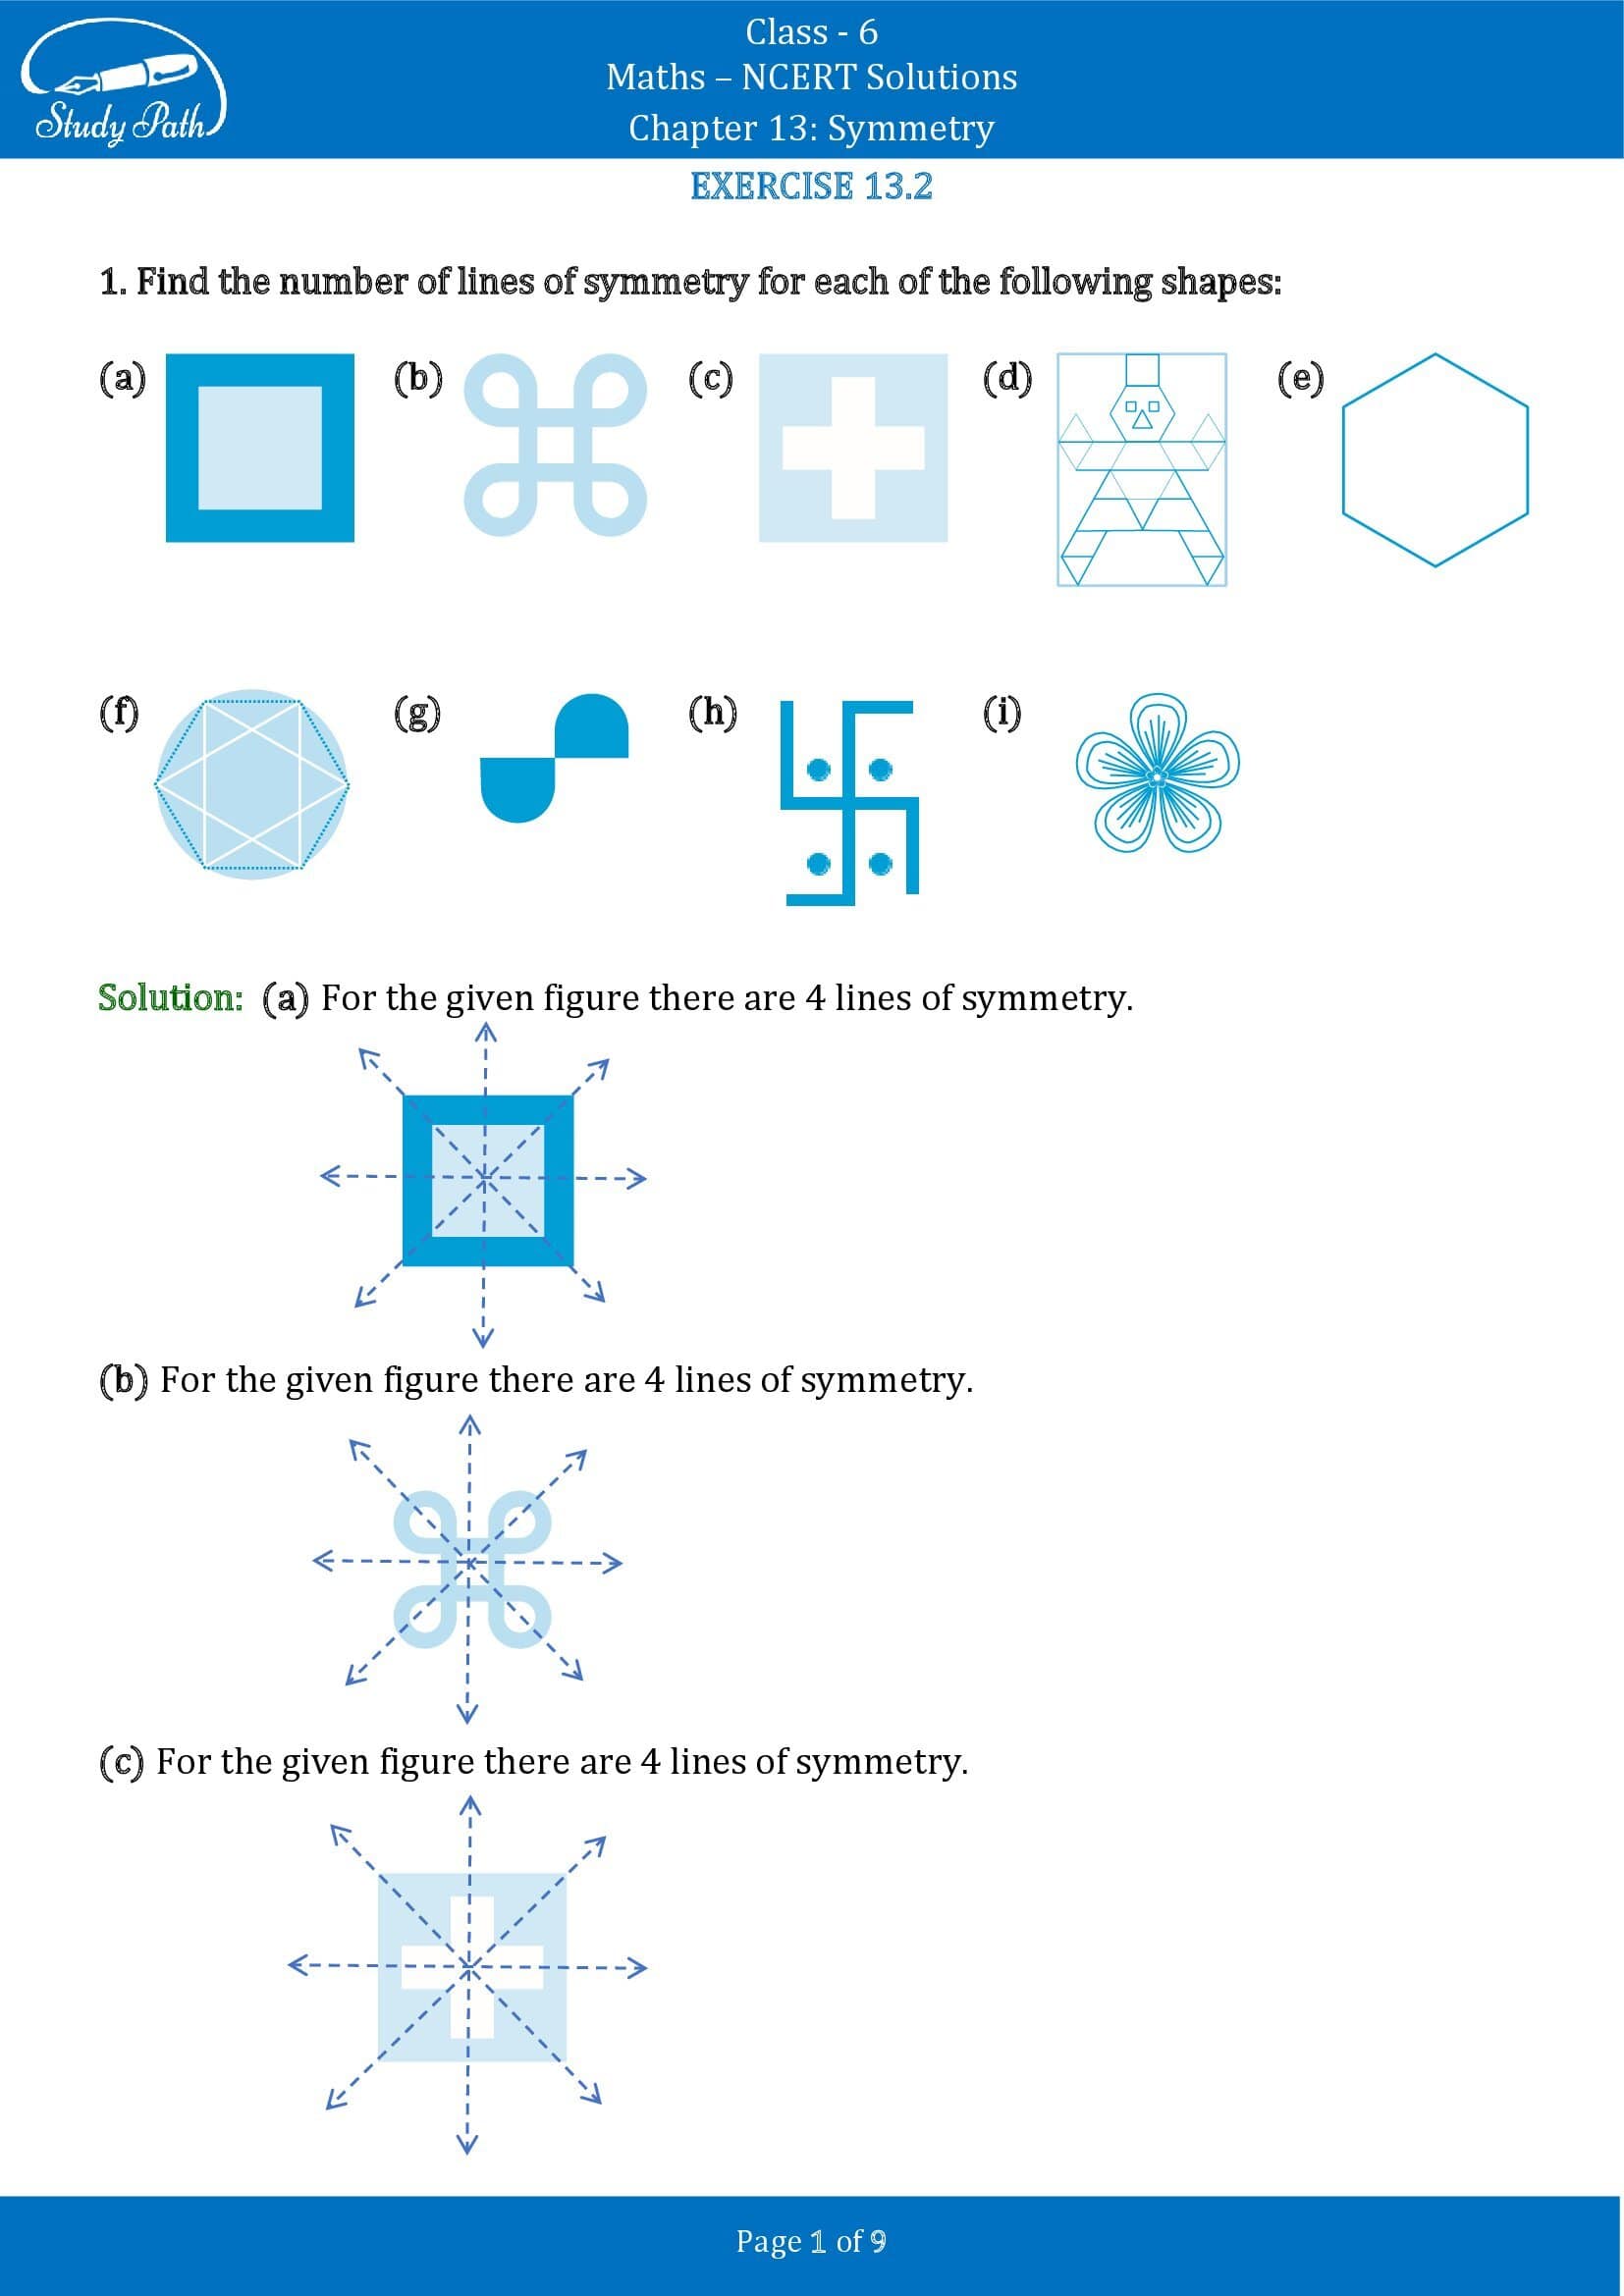 NCERT Solutions for Class 6 Maths Chapter 13 Symmetry Exercise 13.2 00001